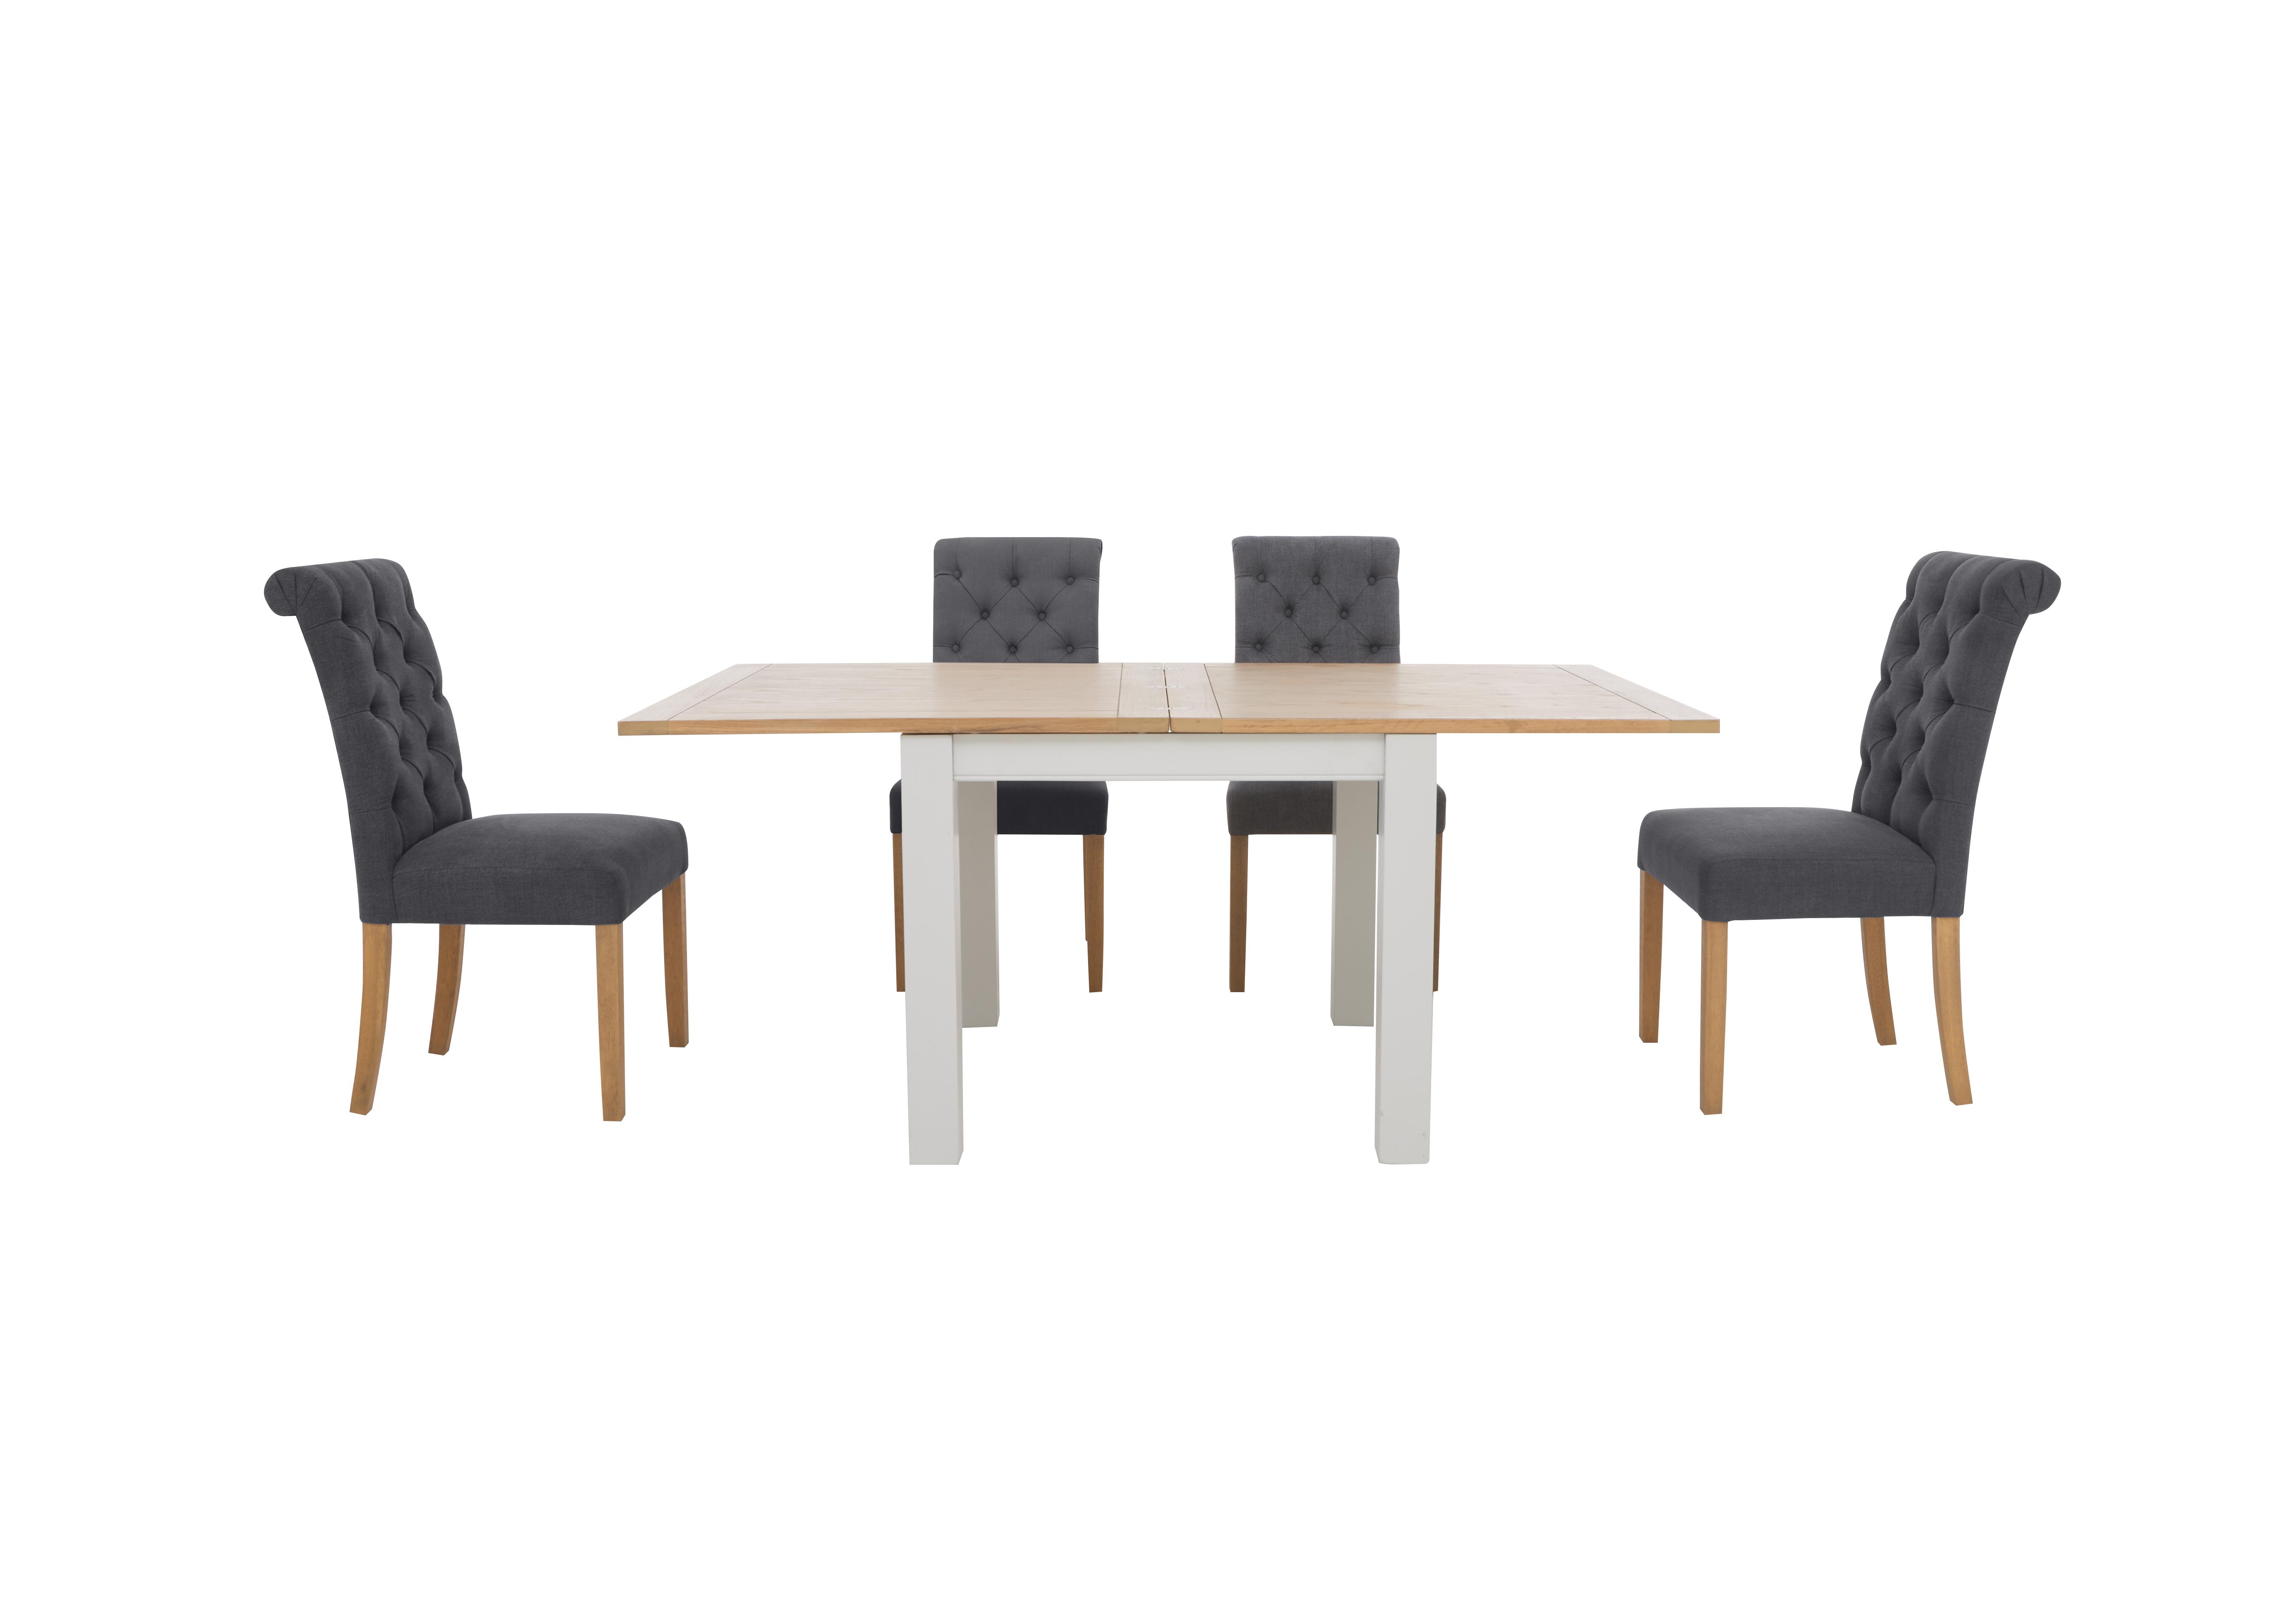 Hamilton Flip Top Dining Table and 4 Button Back Dining Chairs in Charcoal on Furniture Village